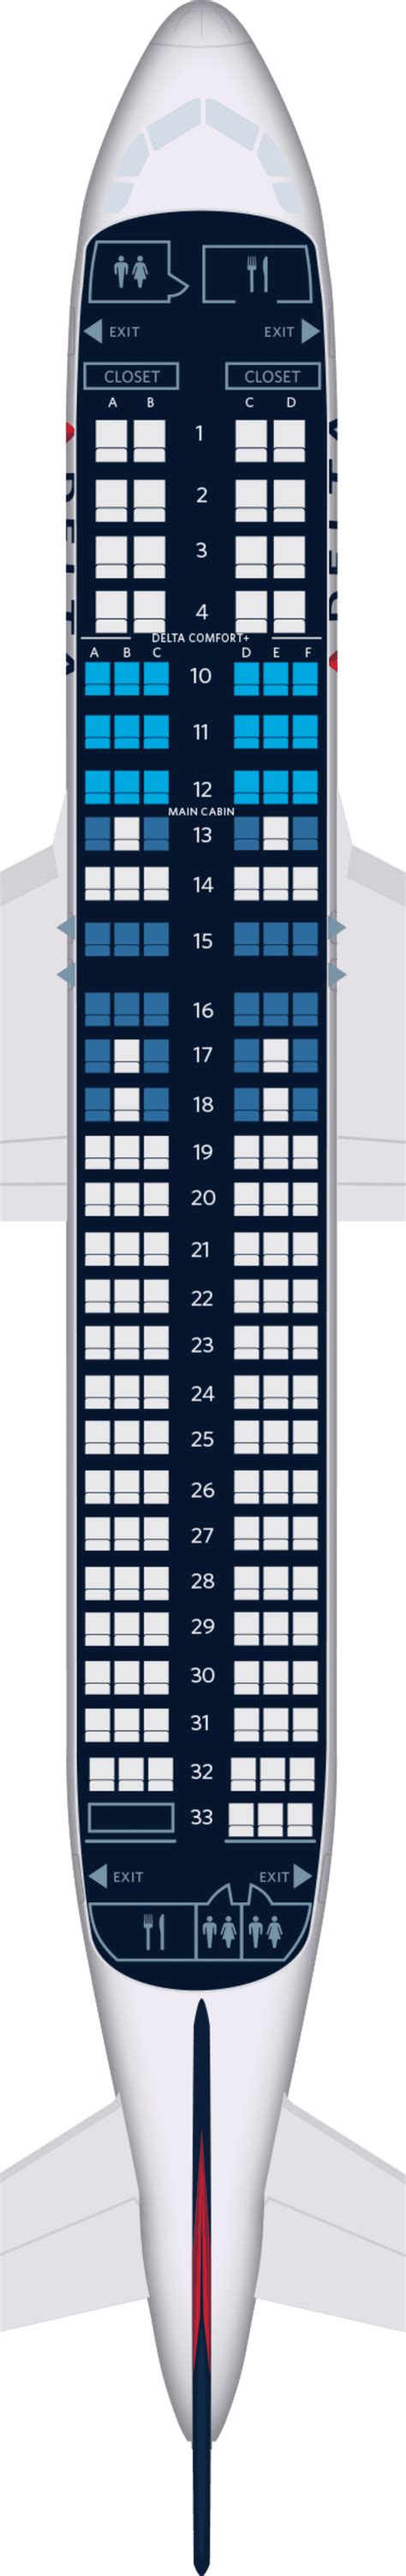 Delta Seating Chart Covid Cdc Classifies Delta Variant As Variant Of